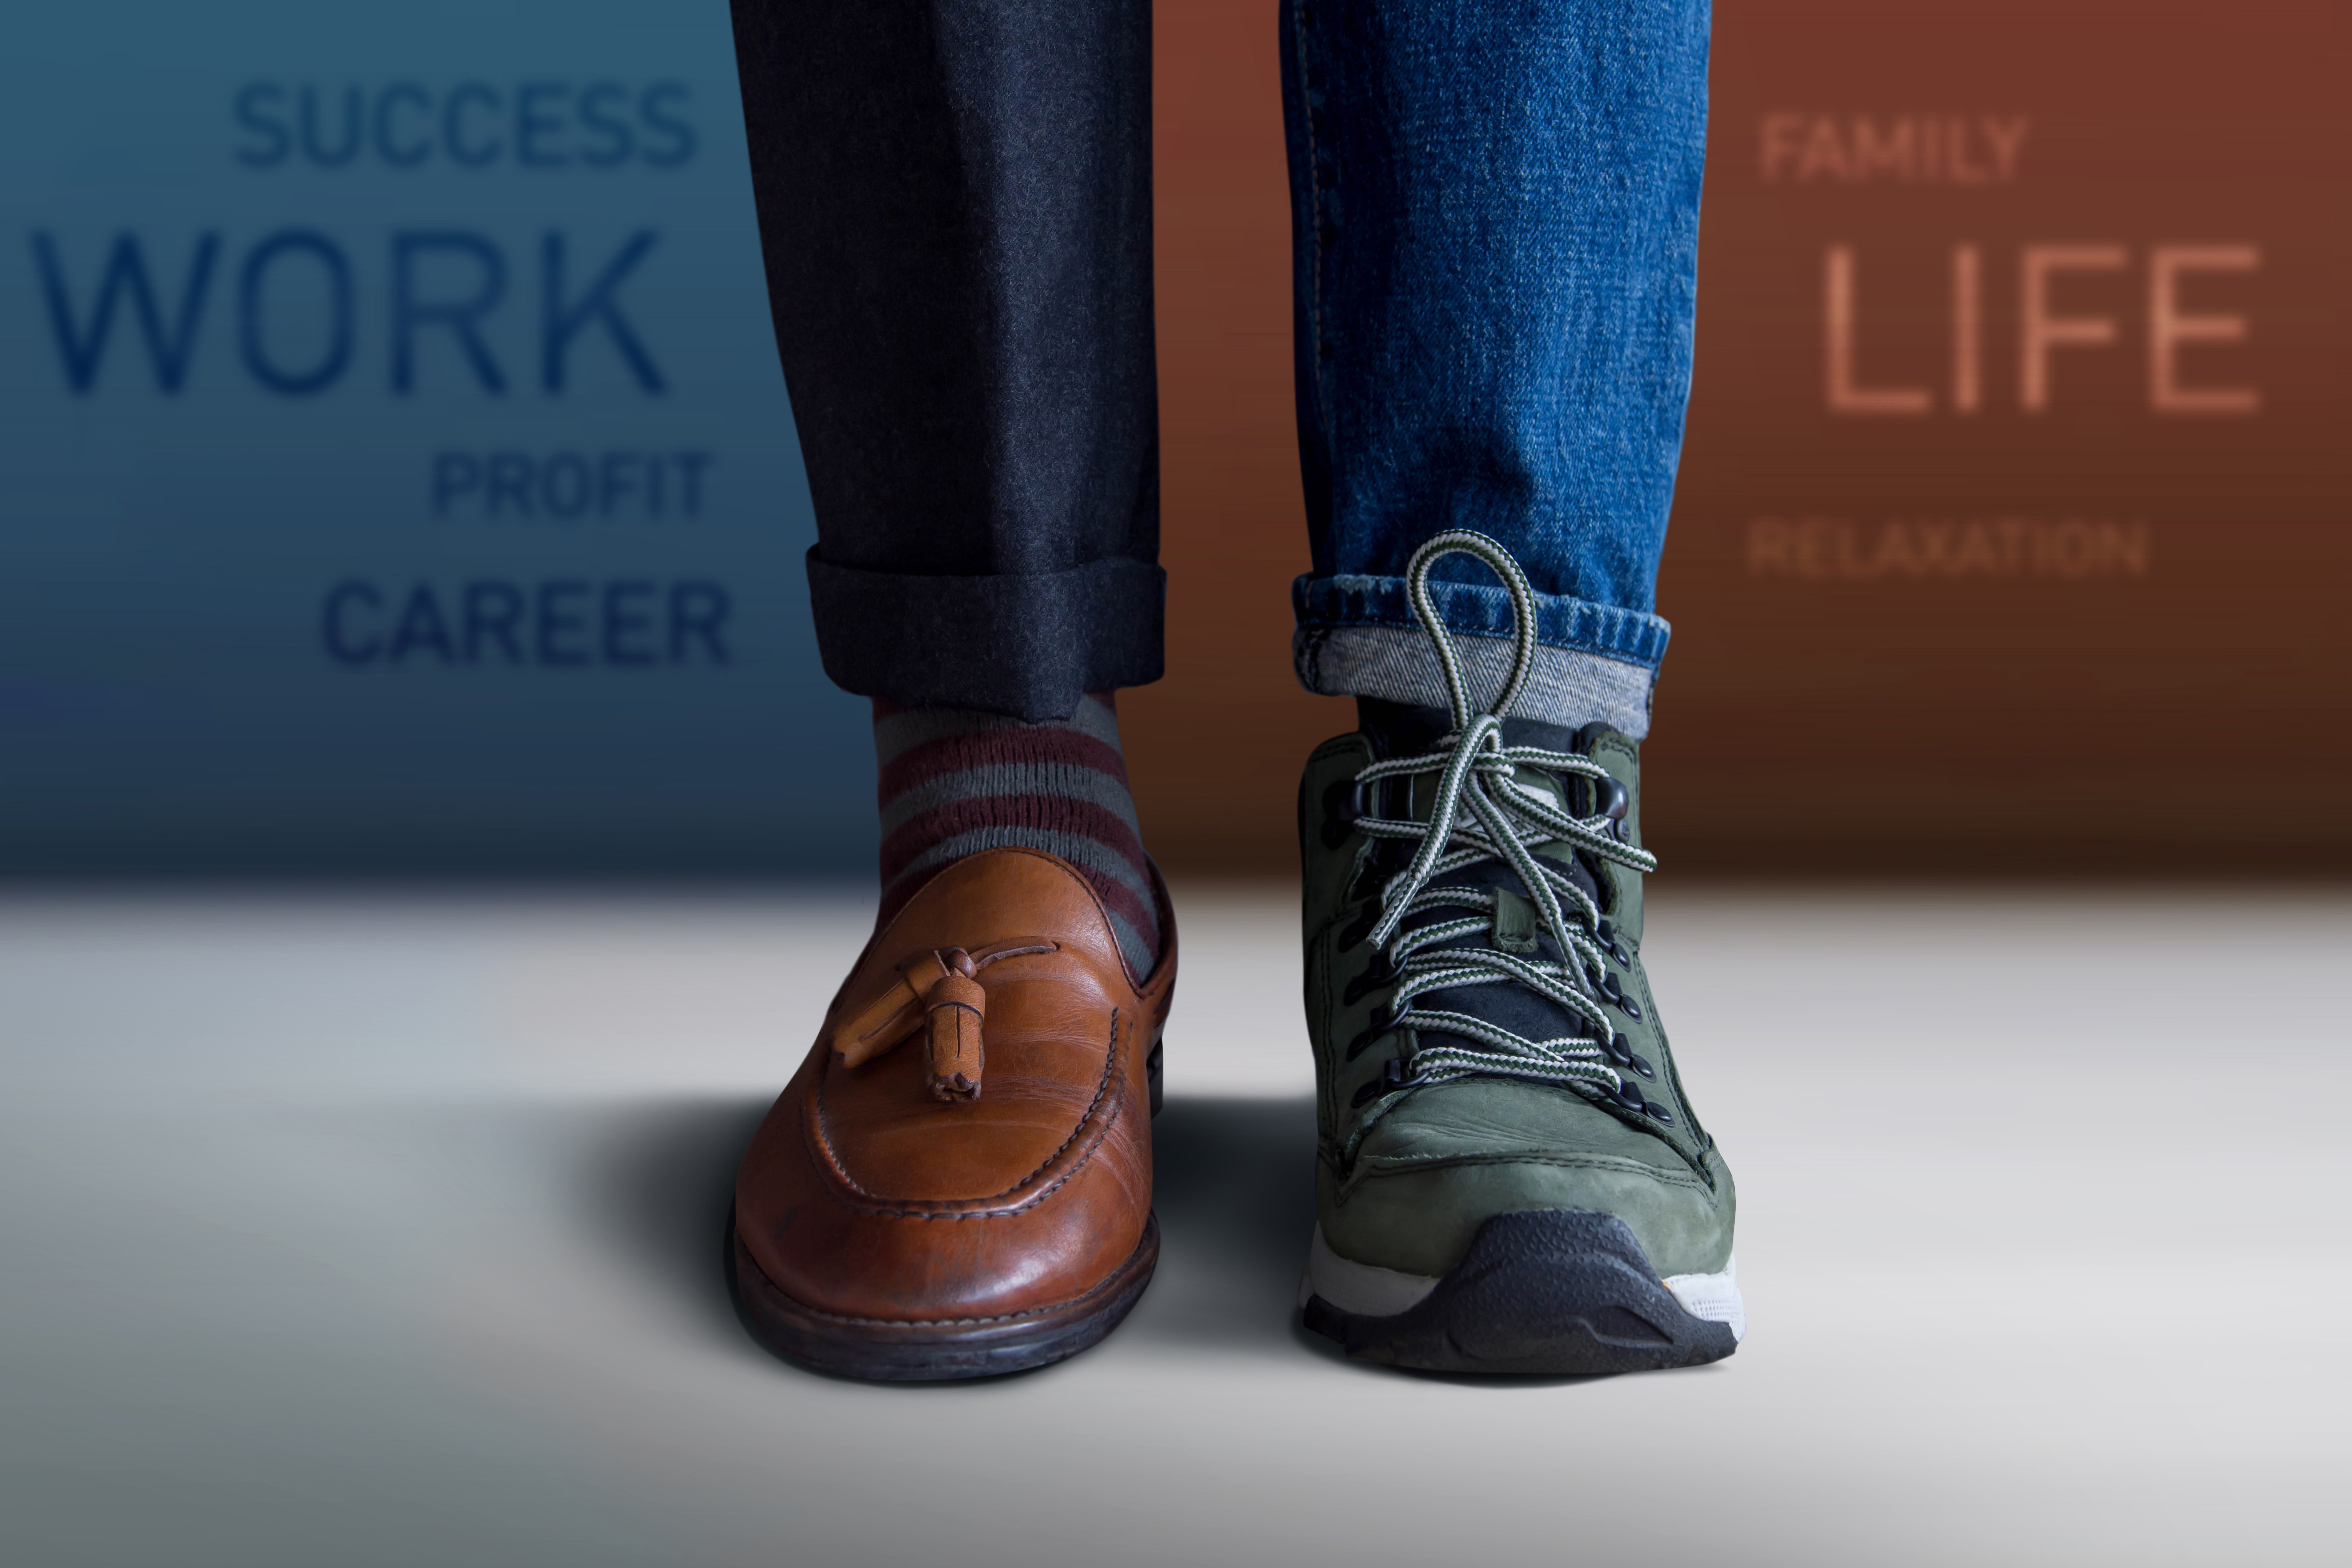 Close-up on a man’s feet: one with pants and dress shoe, the other with jeans and hiking boot. 